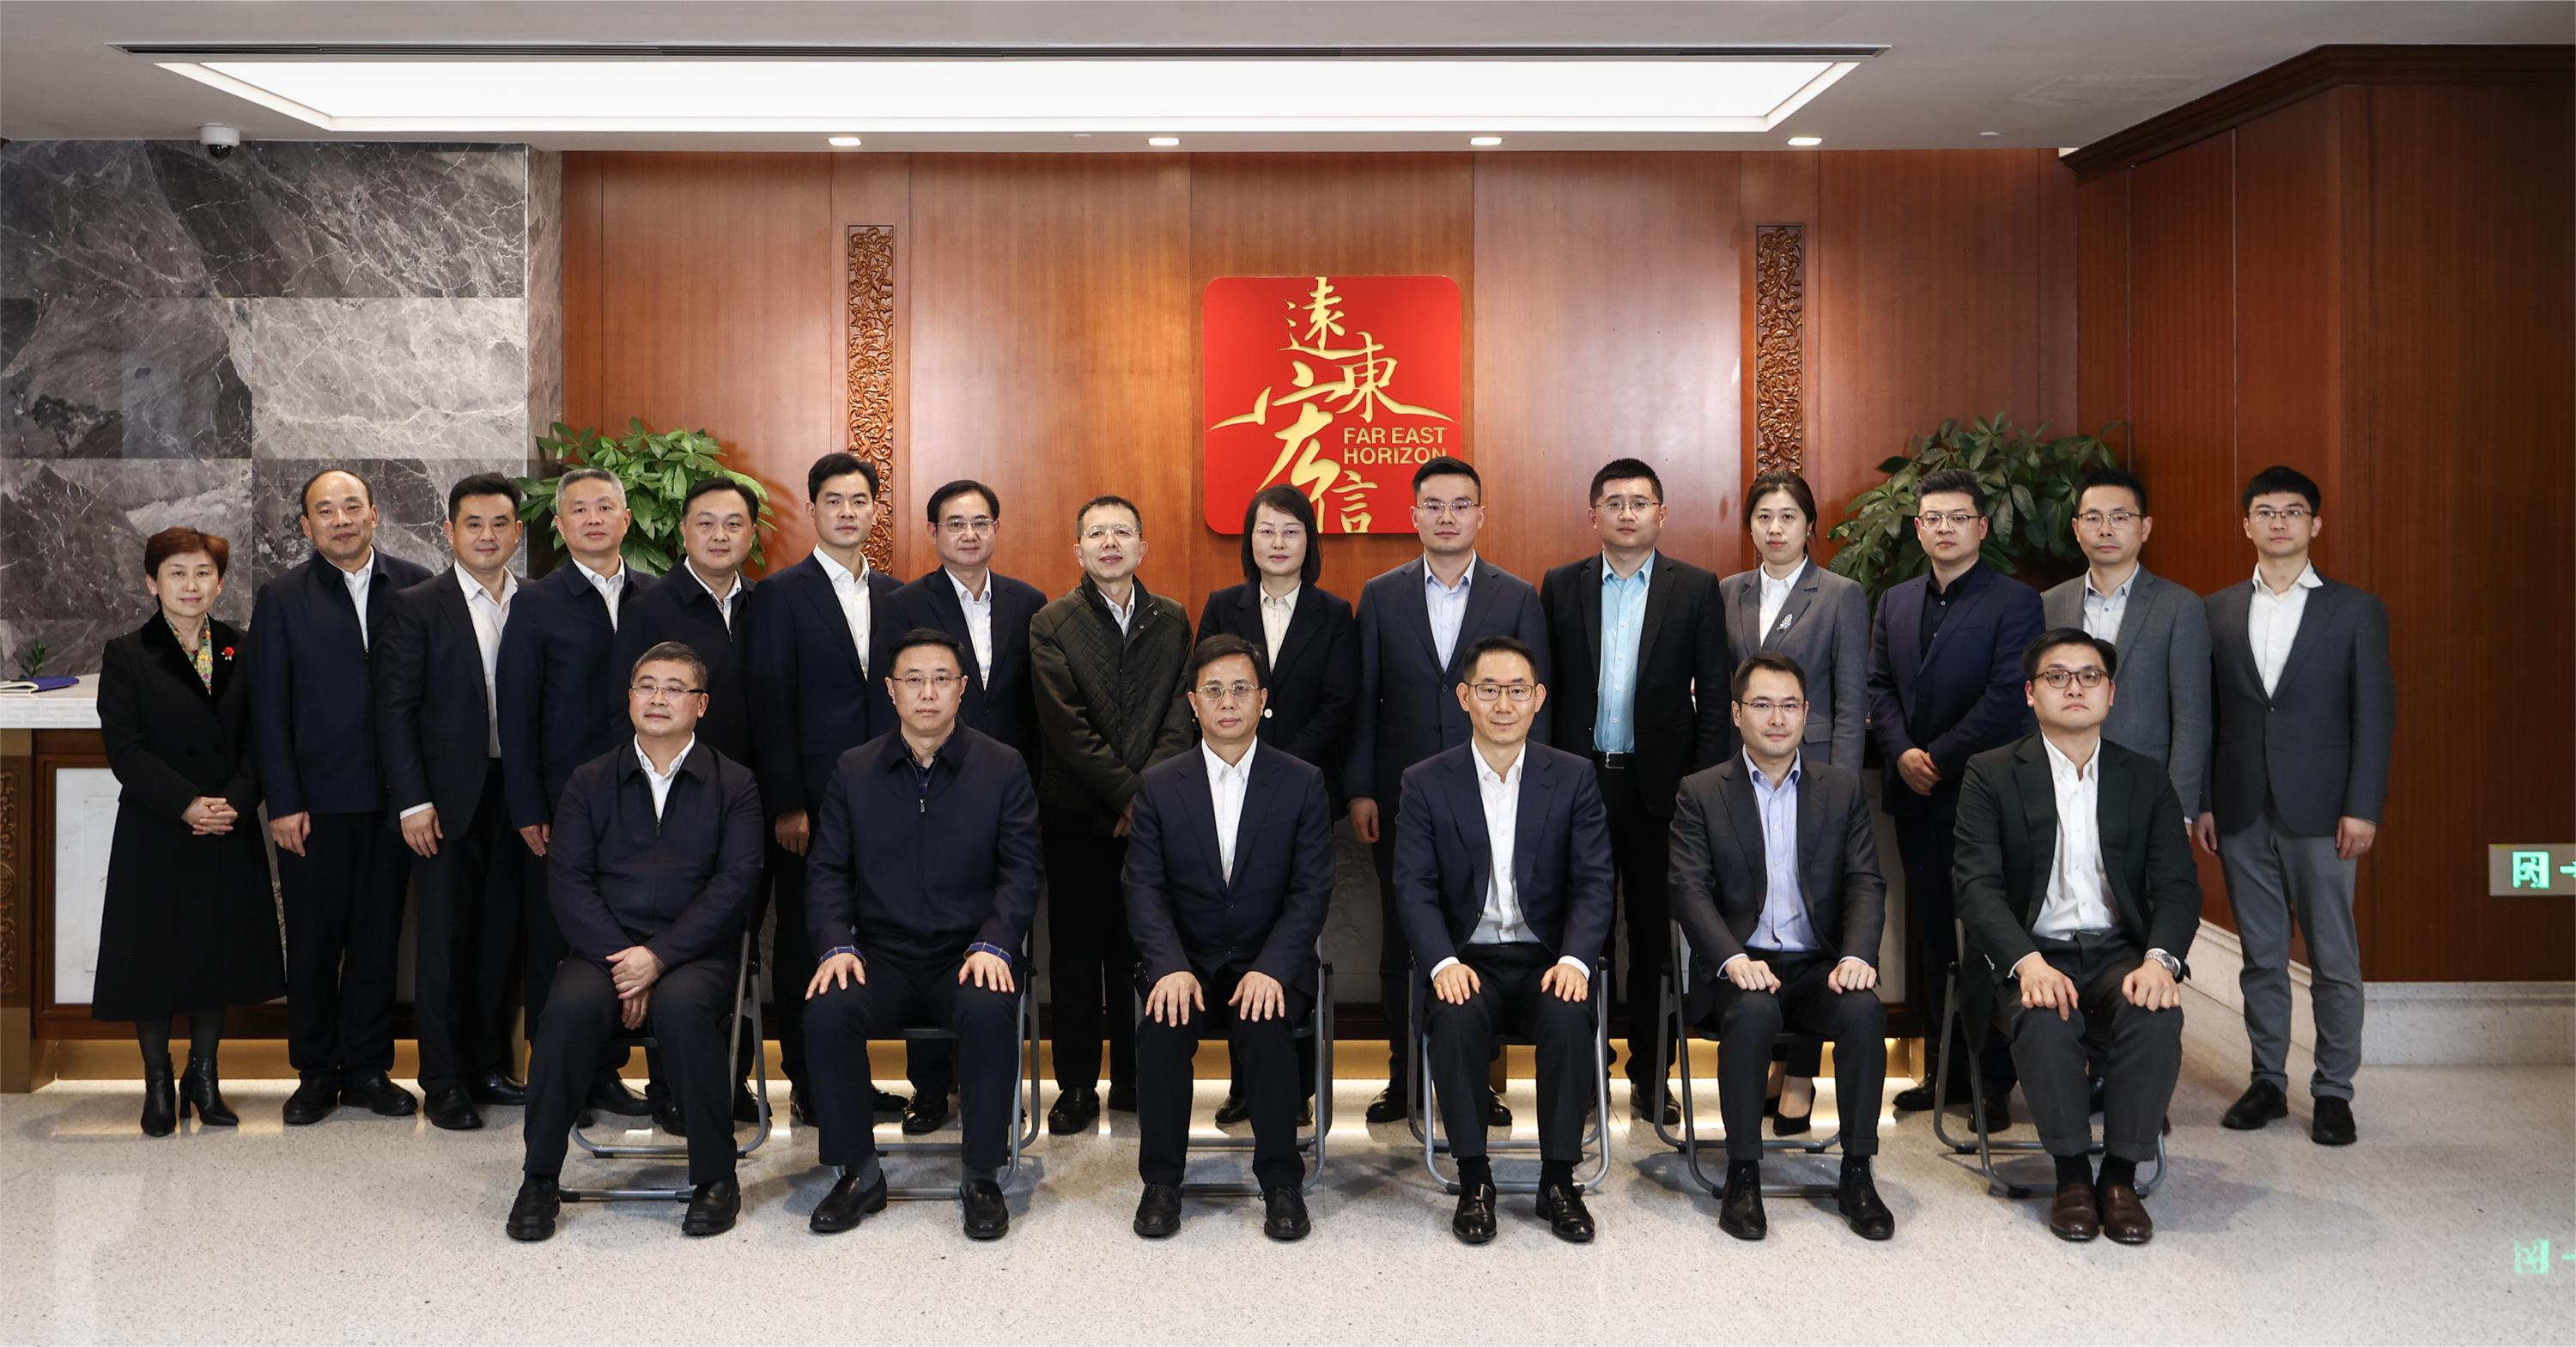 Fehorizon and the Government of Changsha Held Exchanges on Cooperation